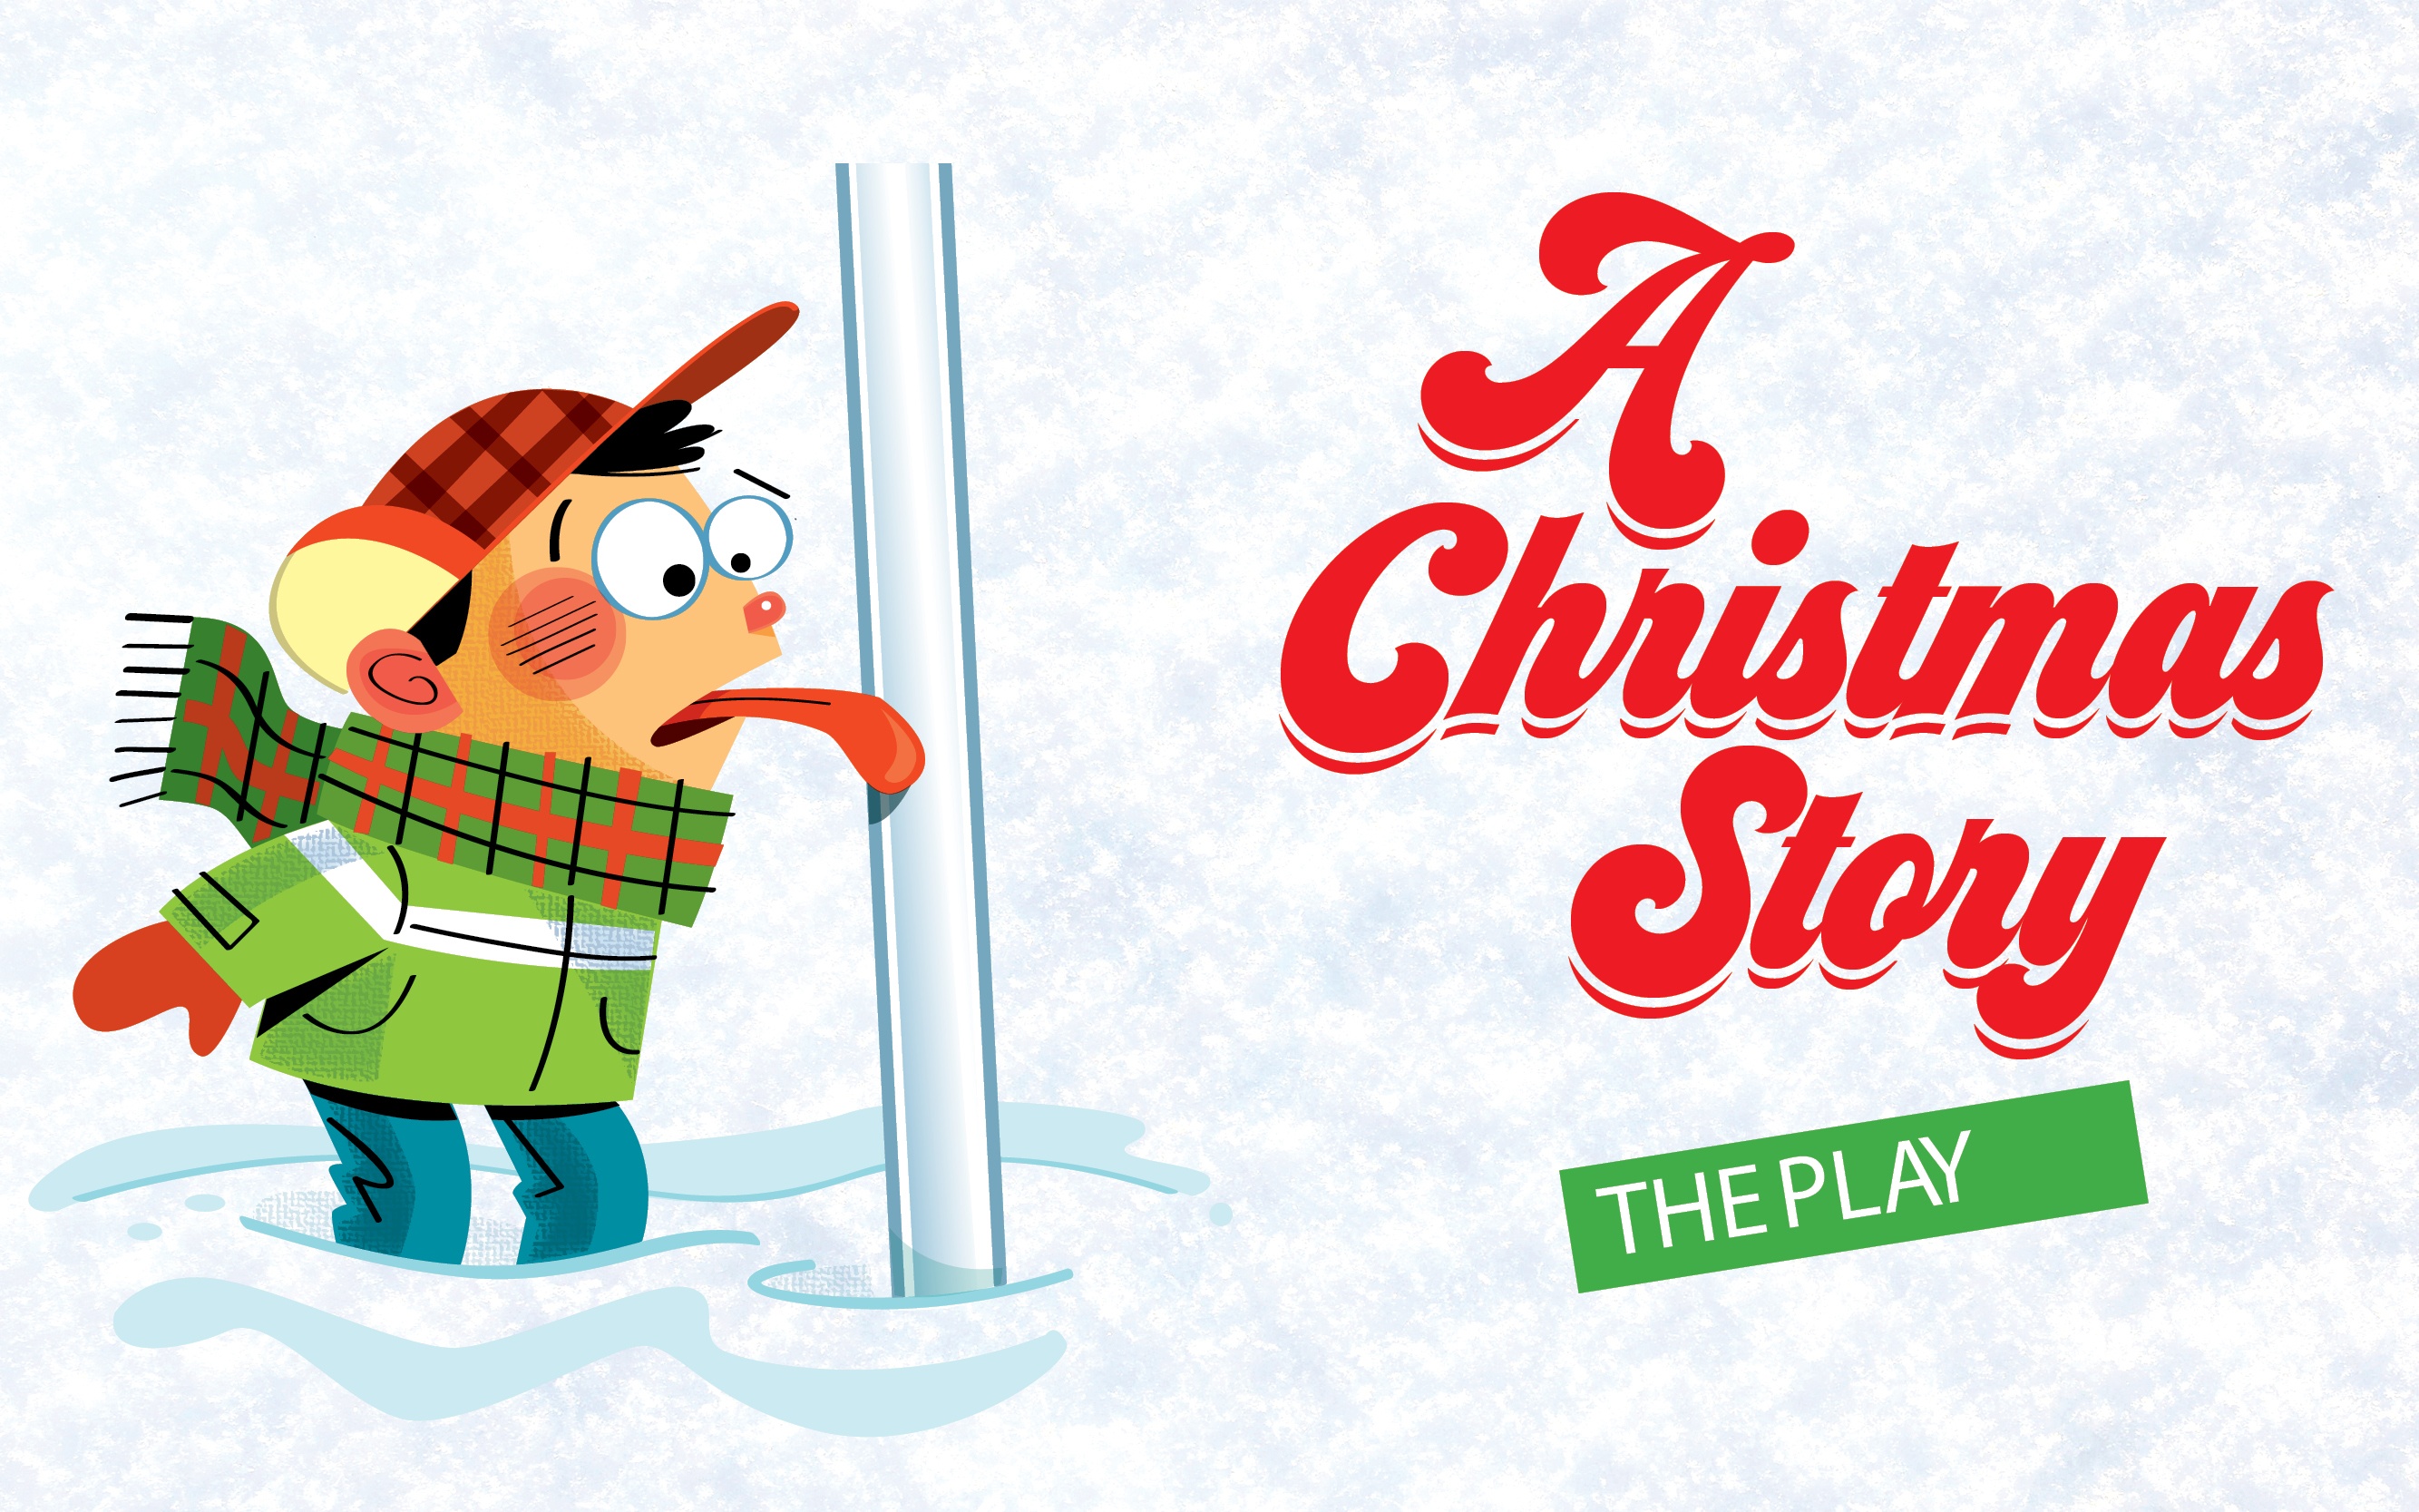 Click to buy group tickets to A Christmas Story: The Play